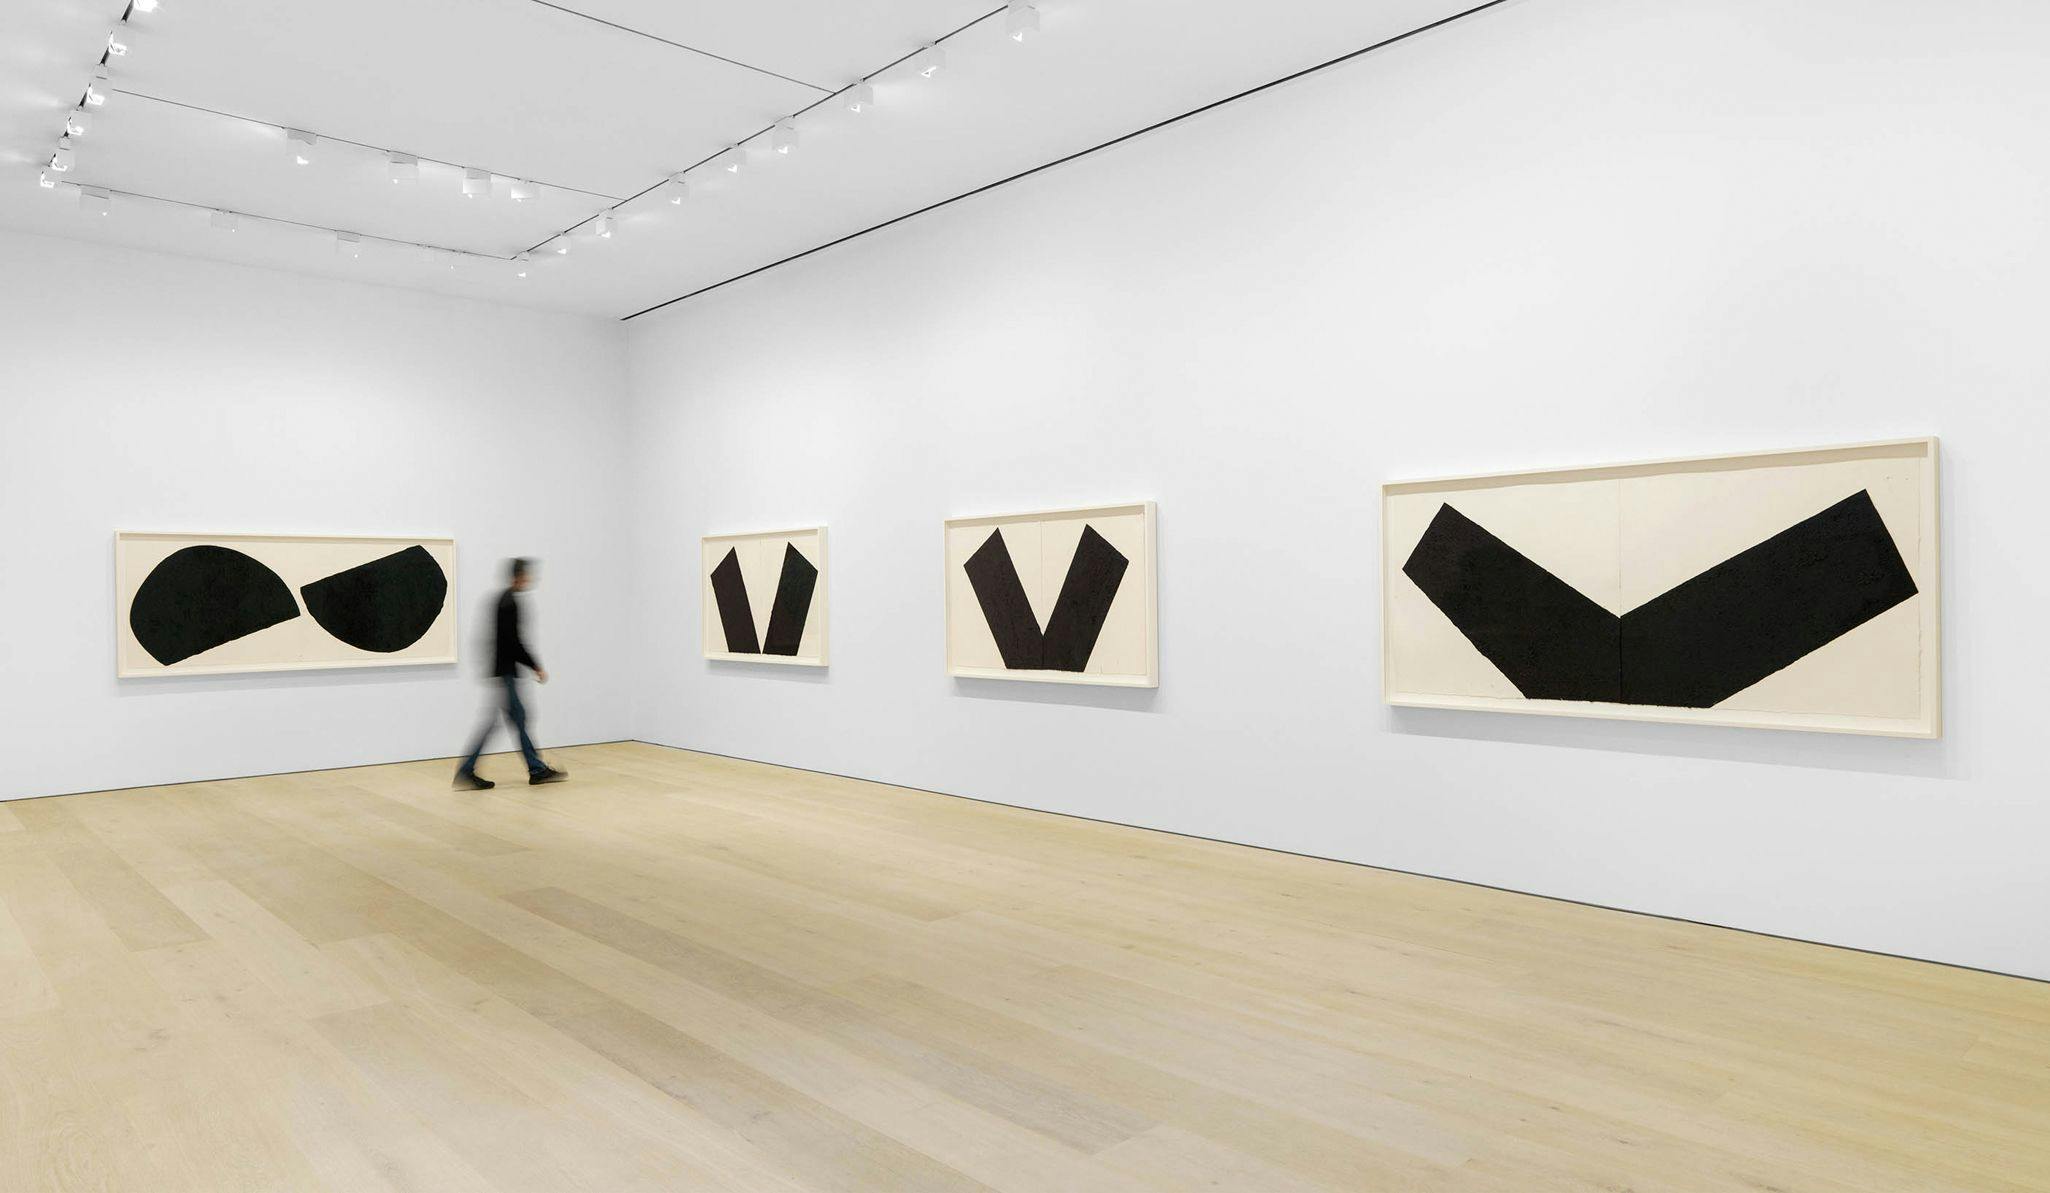 Installation view of the exhibition Richard Serra: Drawings at David Zwirner in New York dated 2022